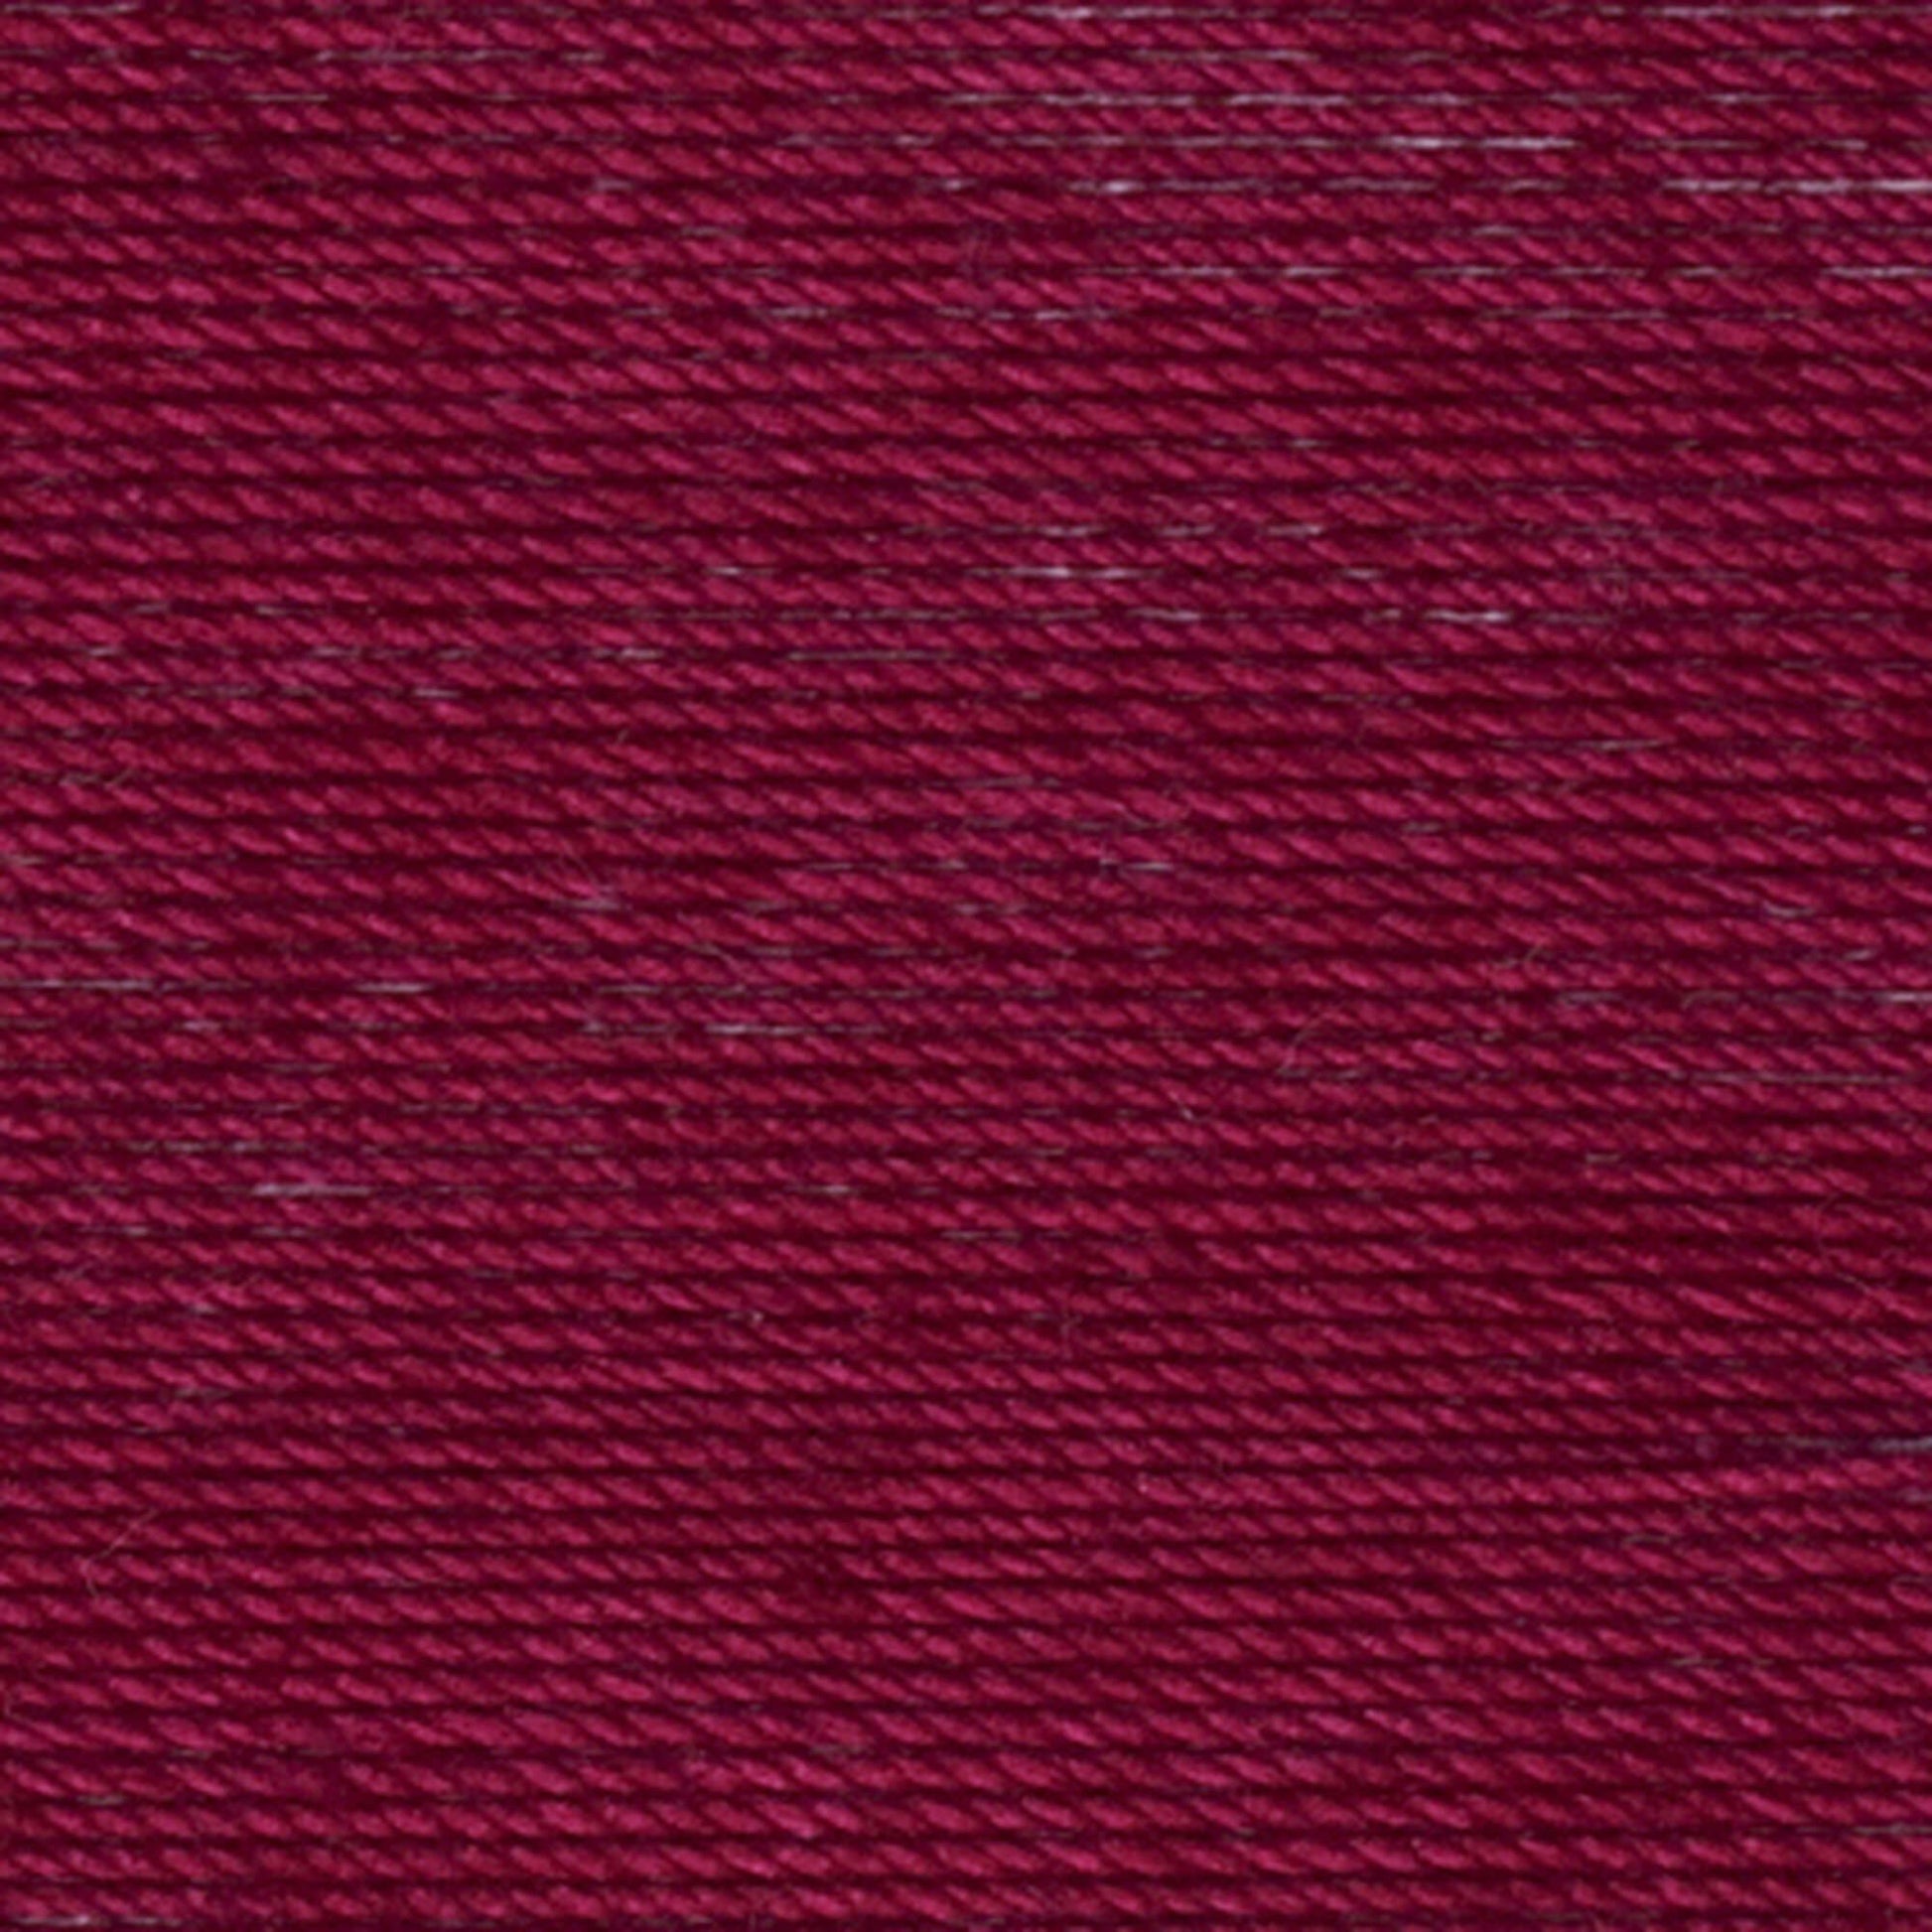 Aunt Lydia's Classic Crochet Thread Size 10 Cardinal Red